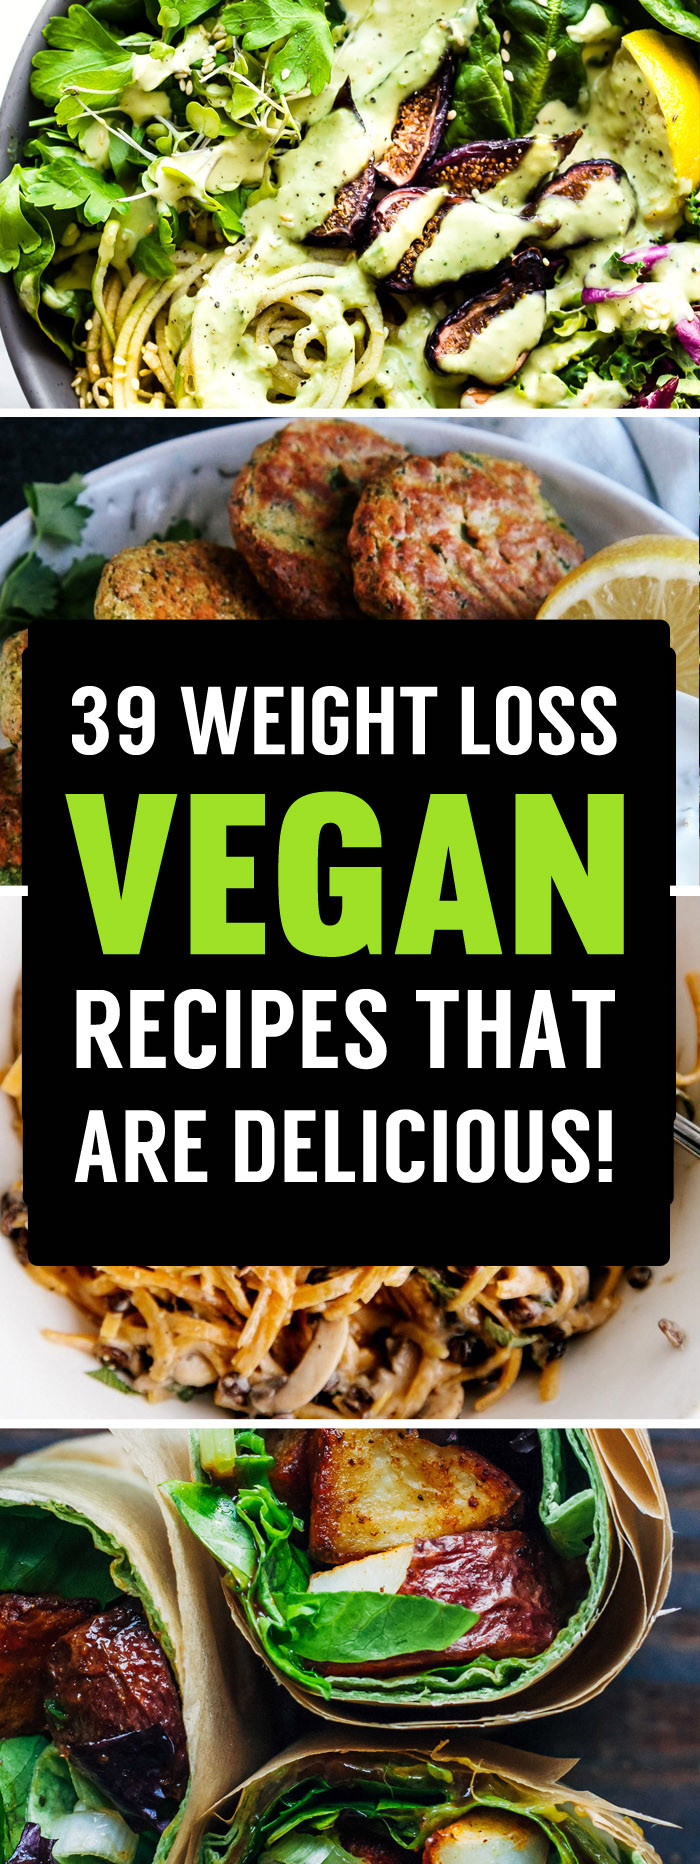 Healthy Vegetarian Dinner Recipes For Weight Loss
 39 Delicious Vegan Recipes That Are Perfect For Losing